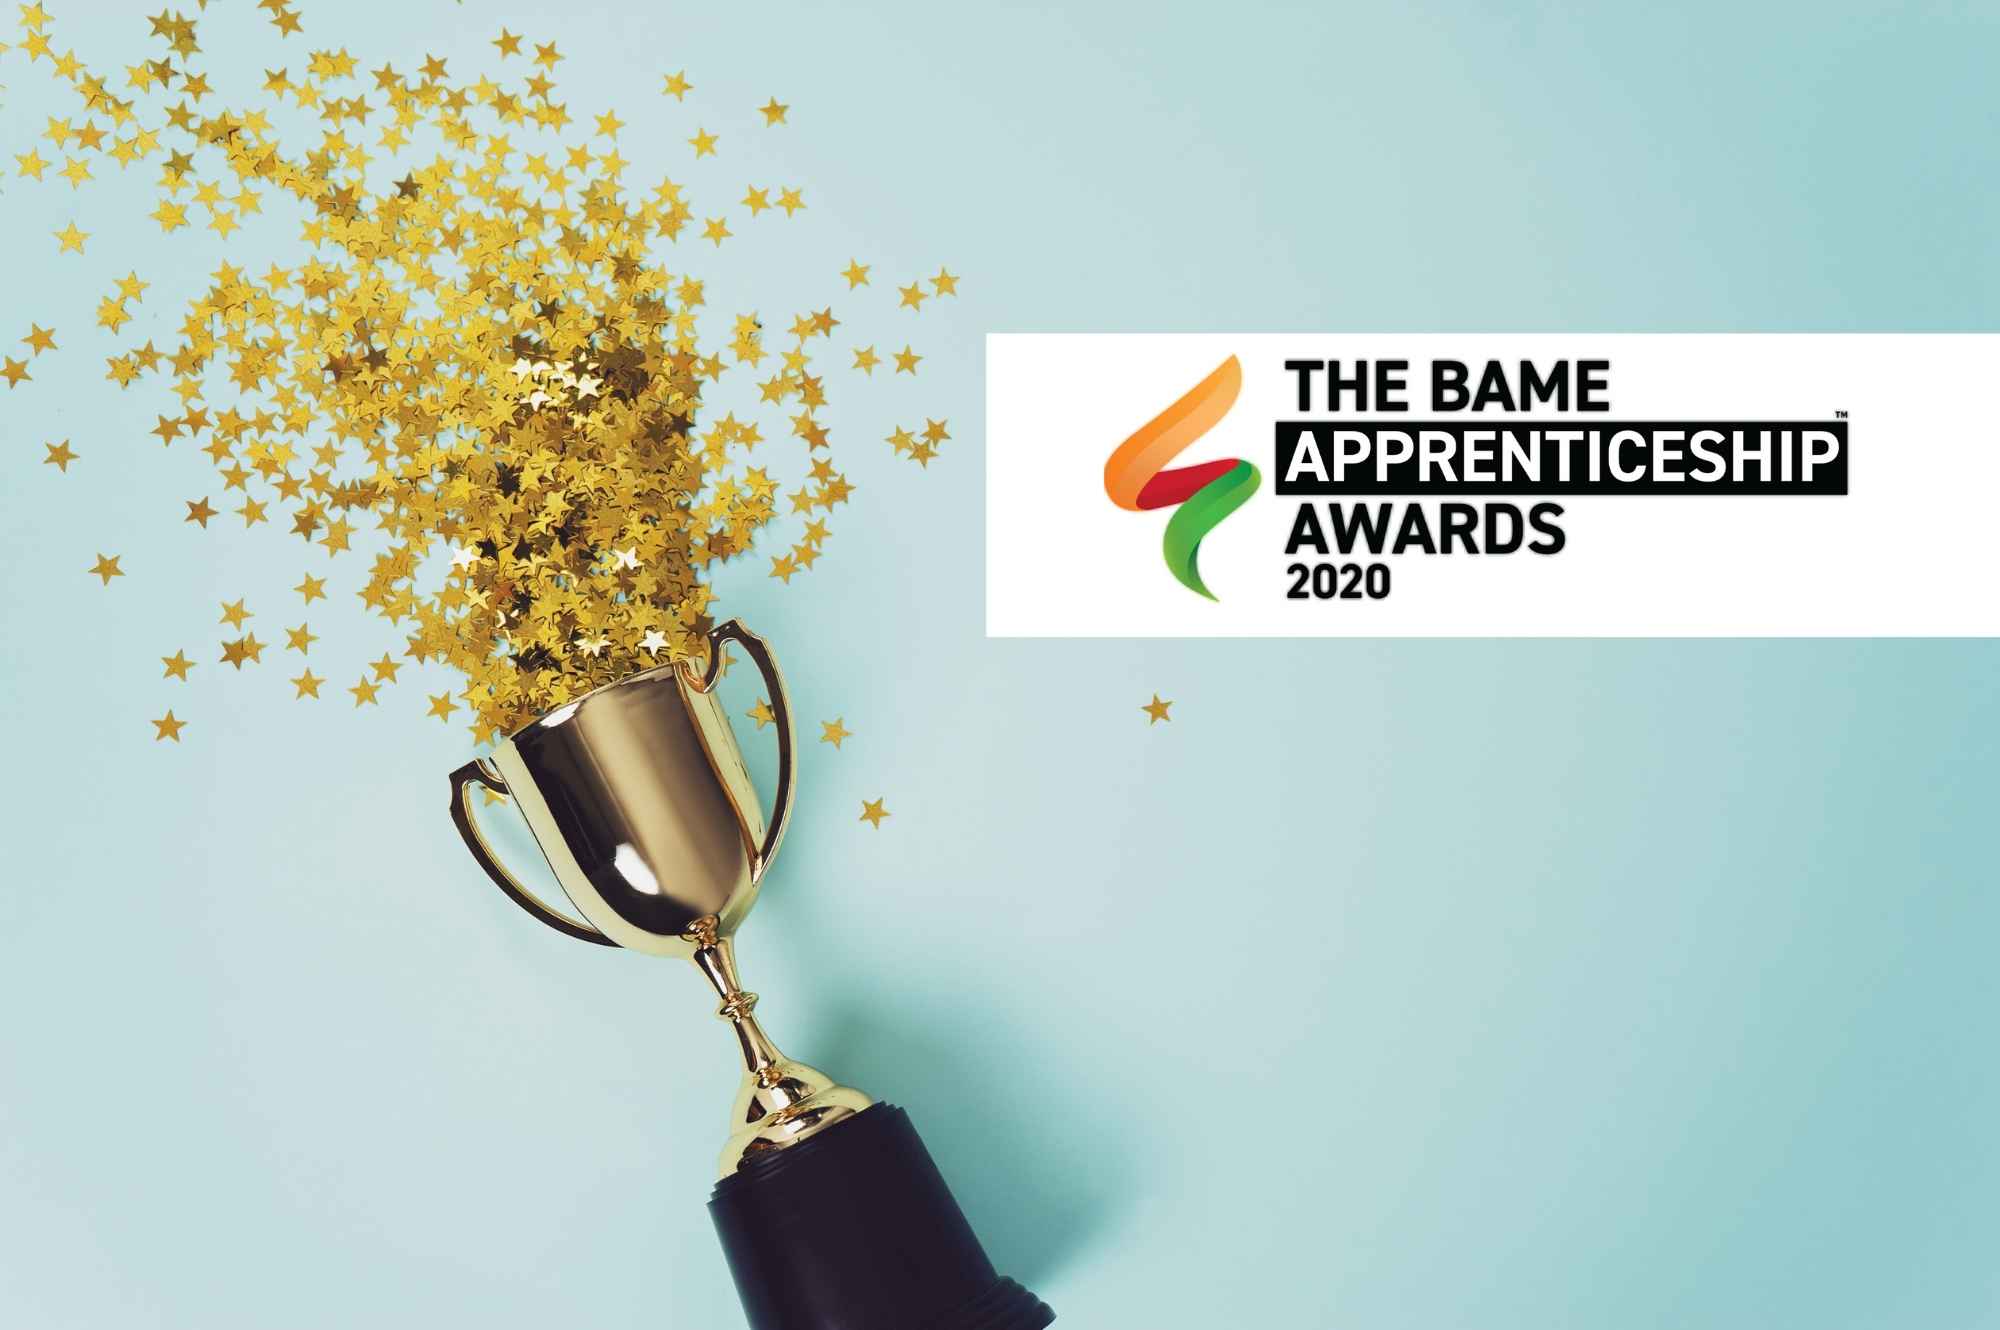 Watch the BAME Apprenticeship Awards 2020